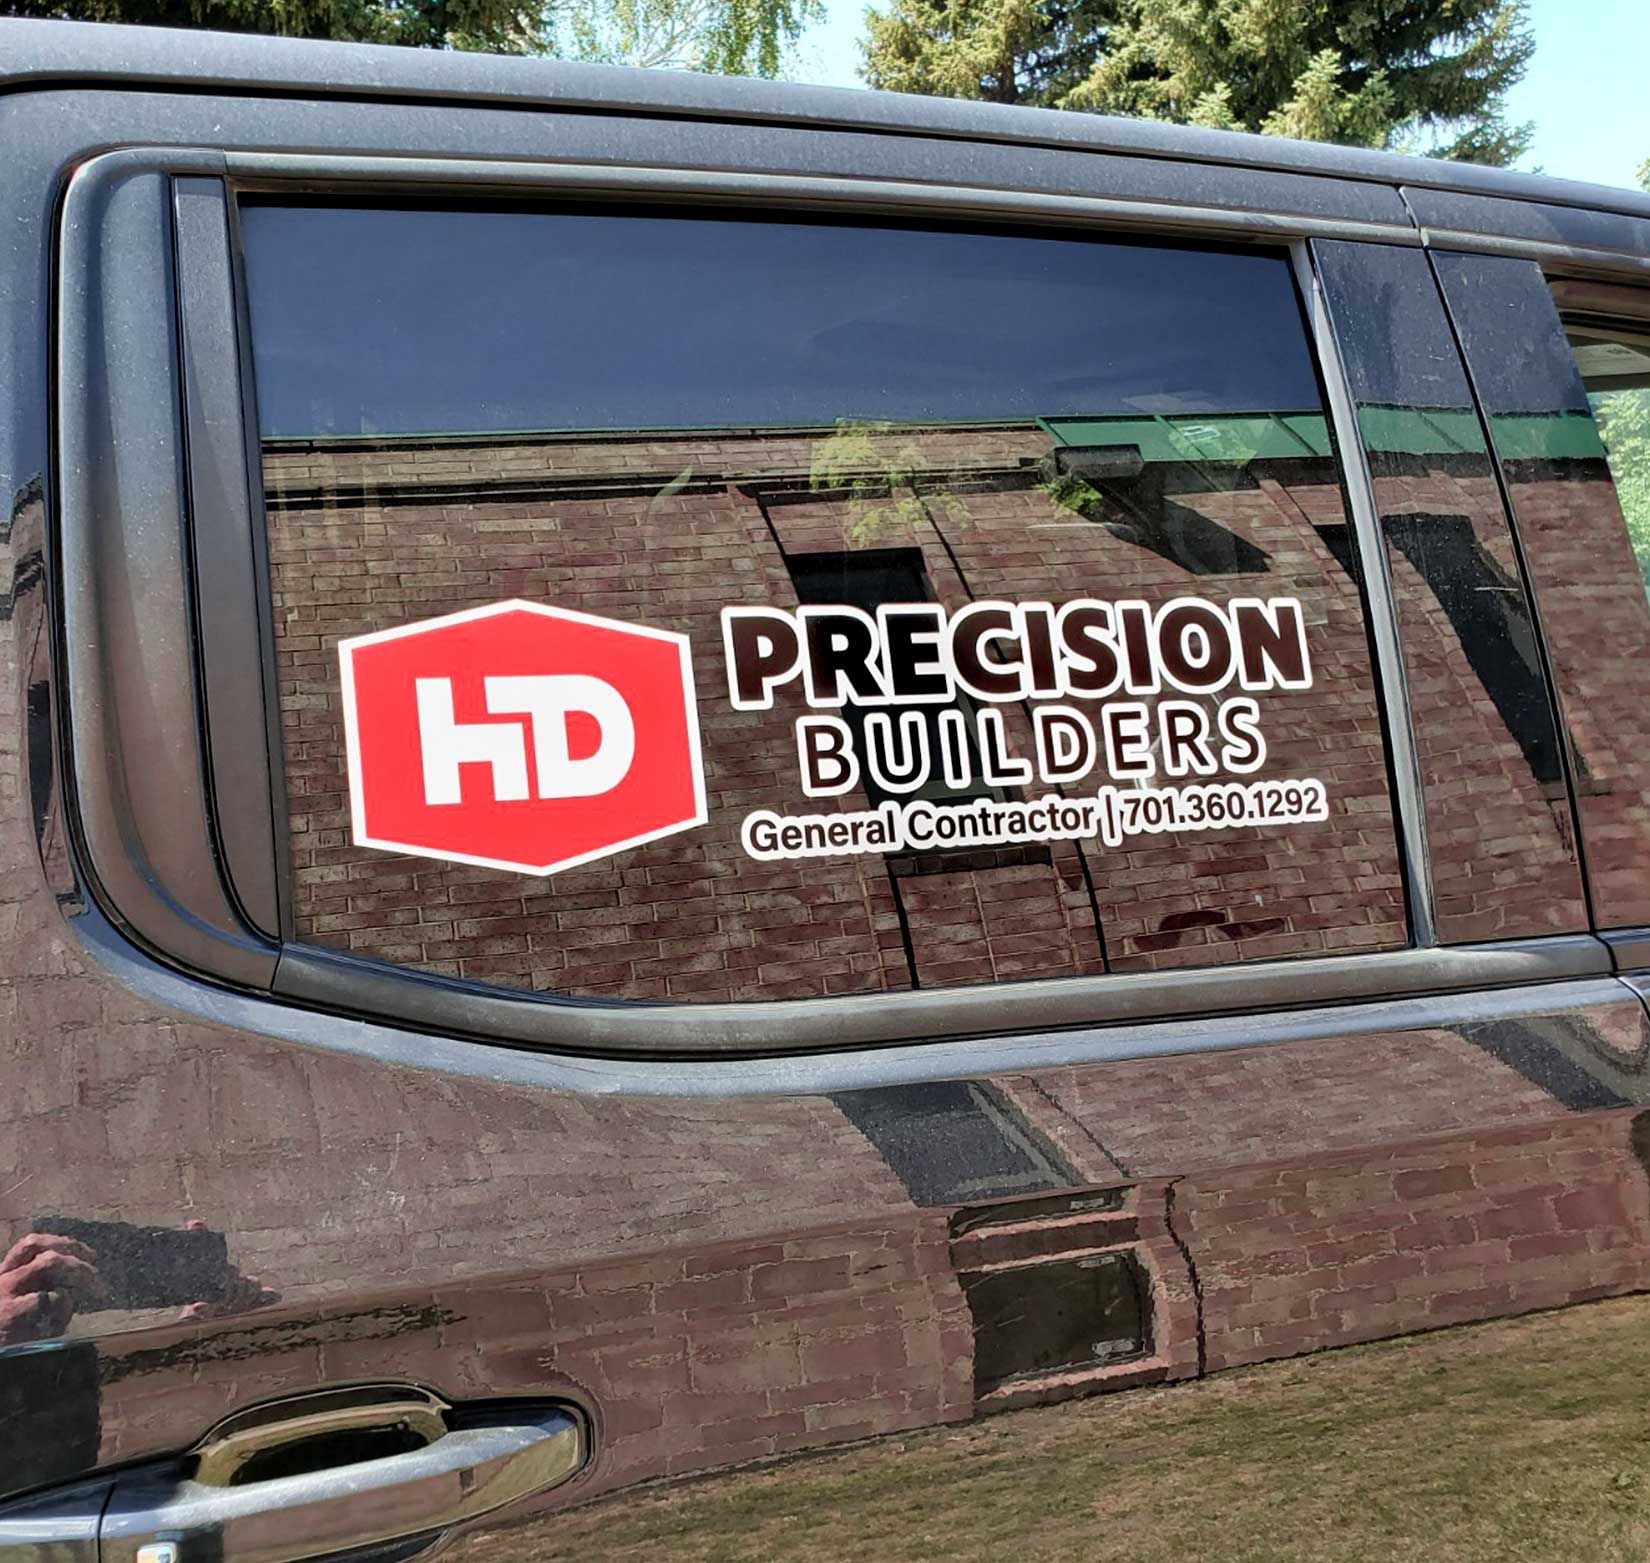 A vinyl decal for Precision Builders on the side window of a black truck